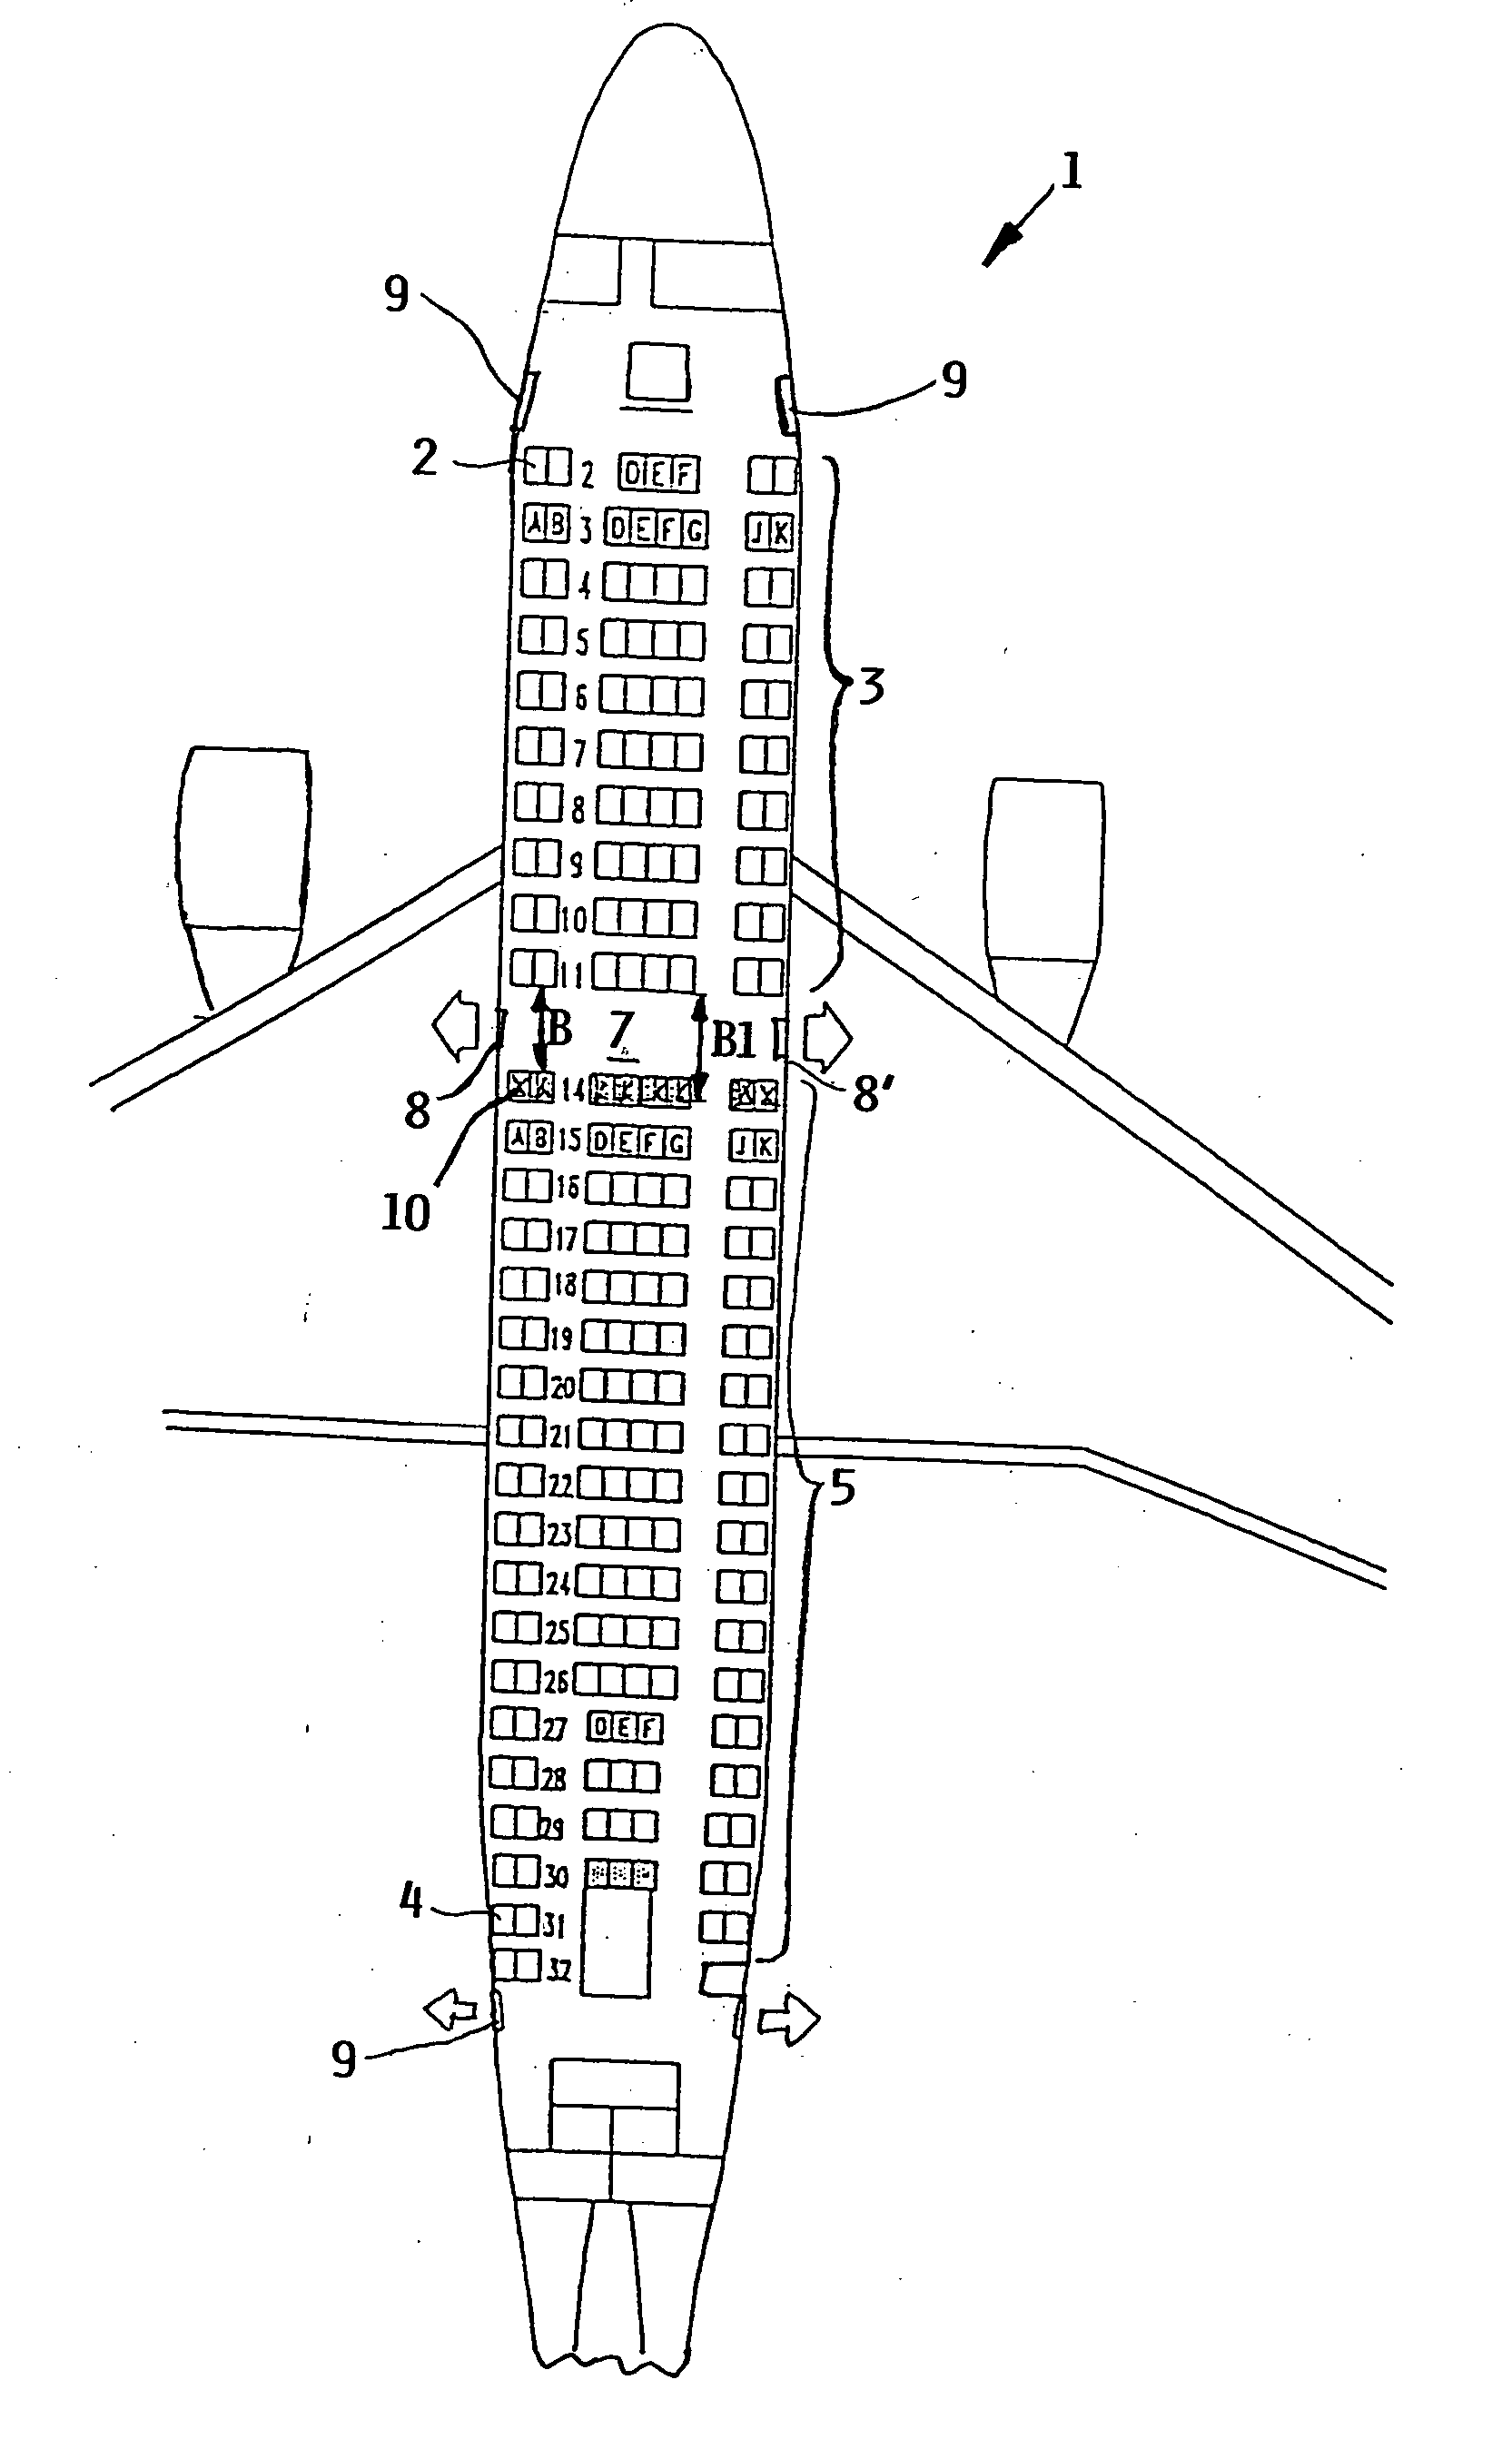 Seating arrangement especially adjoining an emergency exit in an aircraft passenger cabin